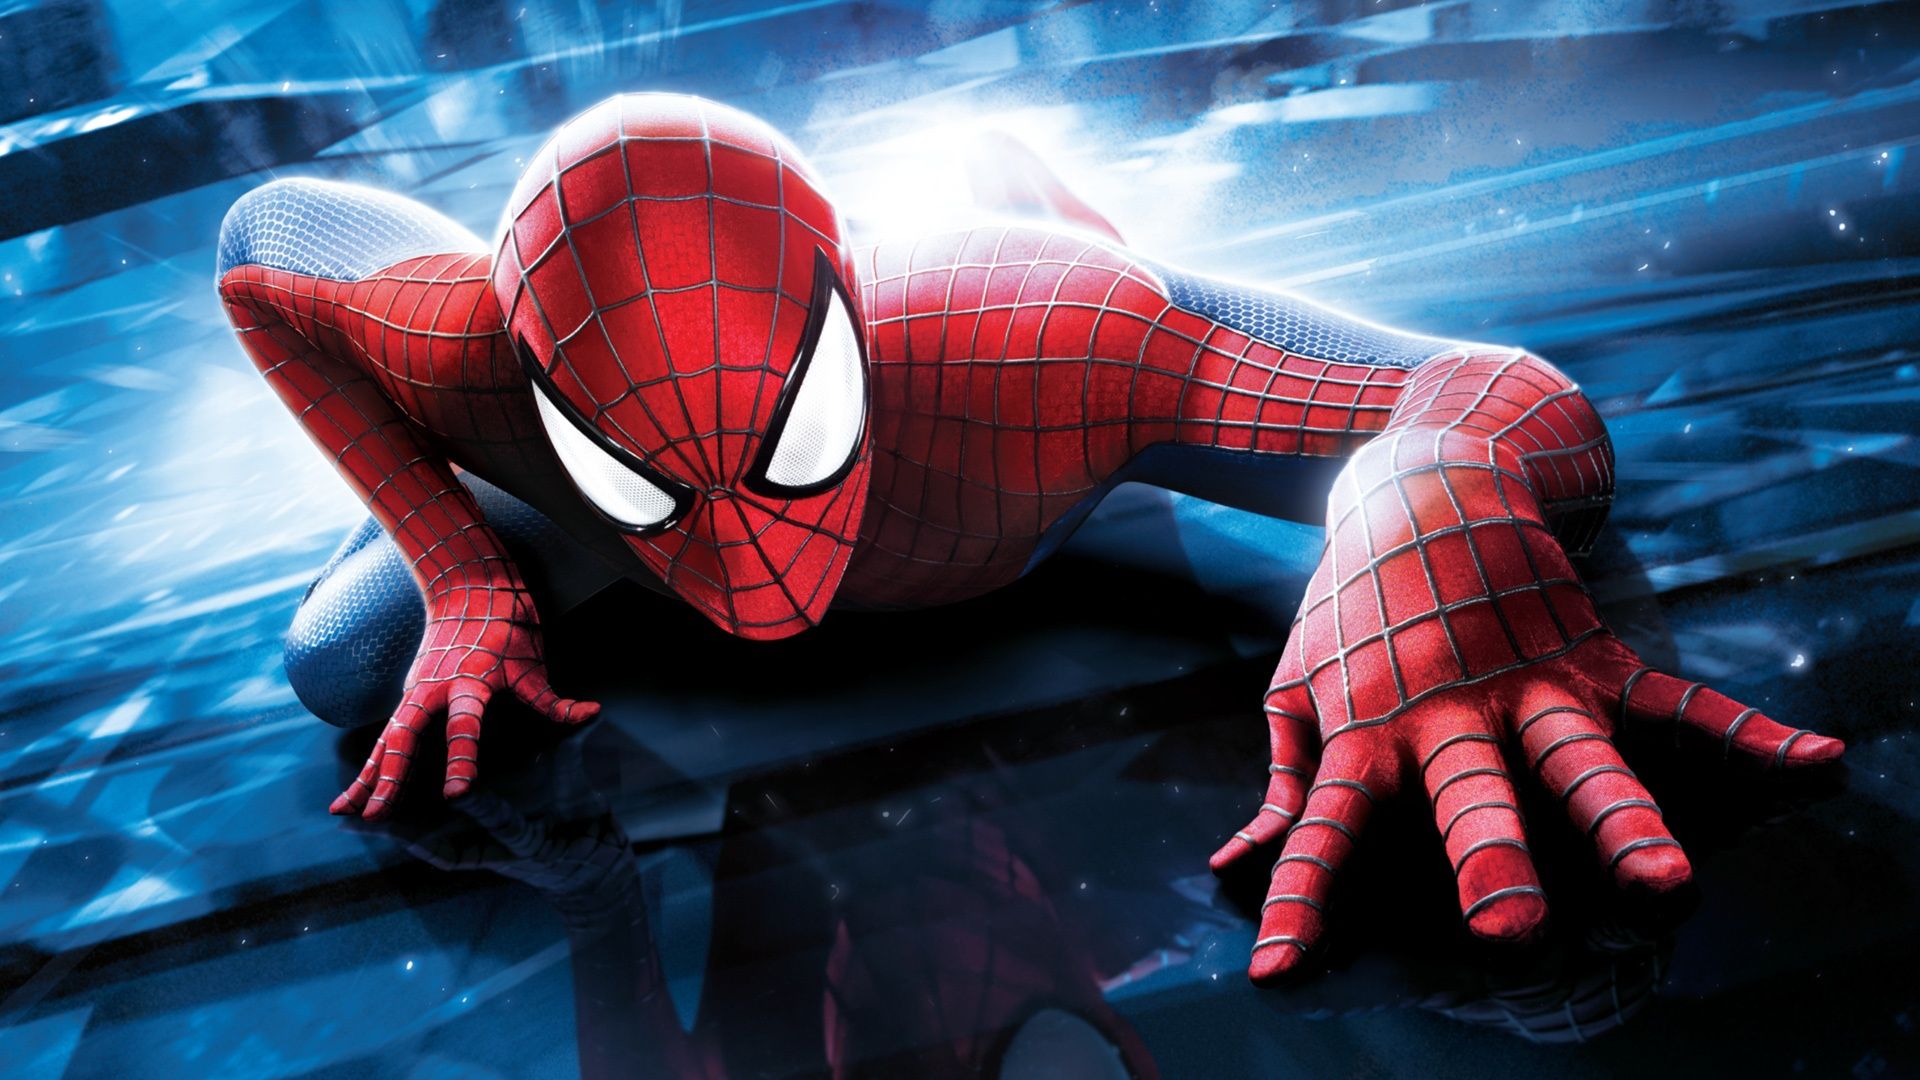 Spiderman Wallpapers HD Backgrounds